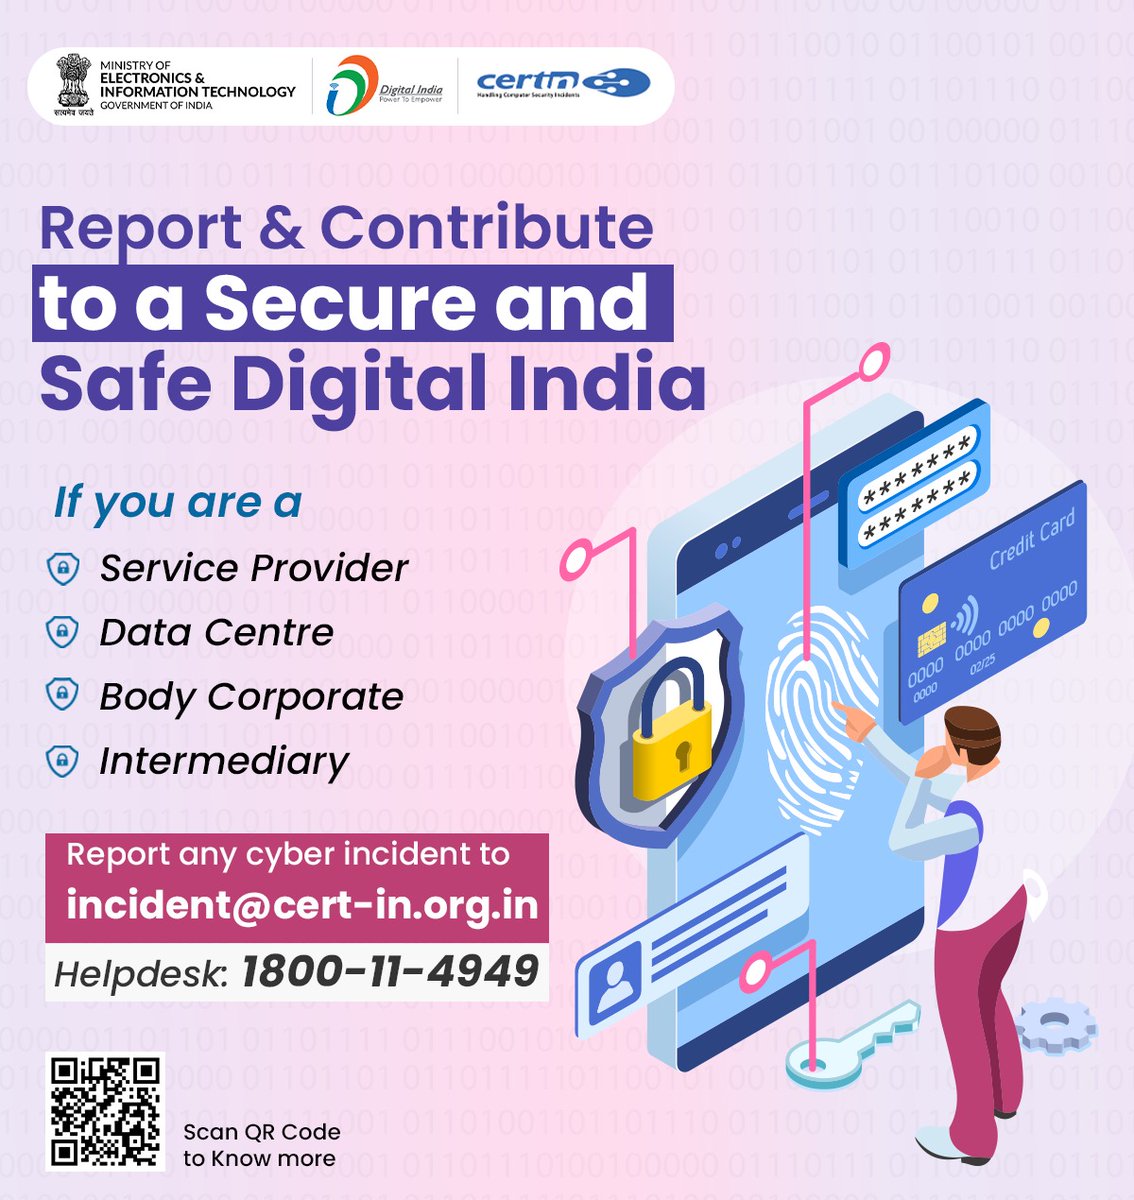 By reporting any computer security incidents to @IndianCERT, the System Administrators and users will receive technical assistance in resolving these incidents. Know more at cert-in.org.in #DigitalIndia #cybersecurity